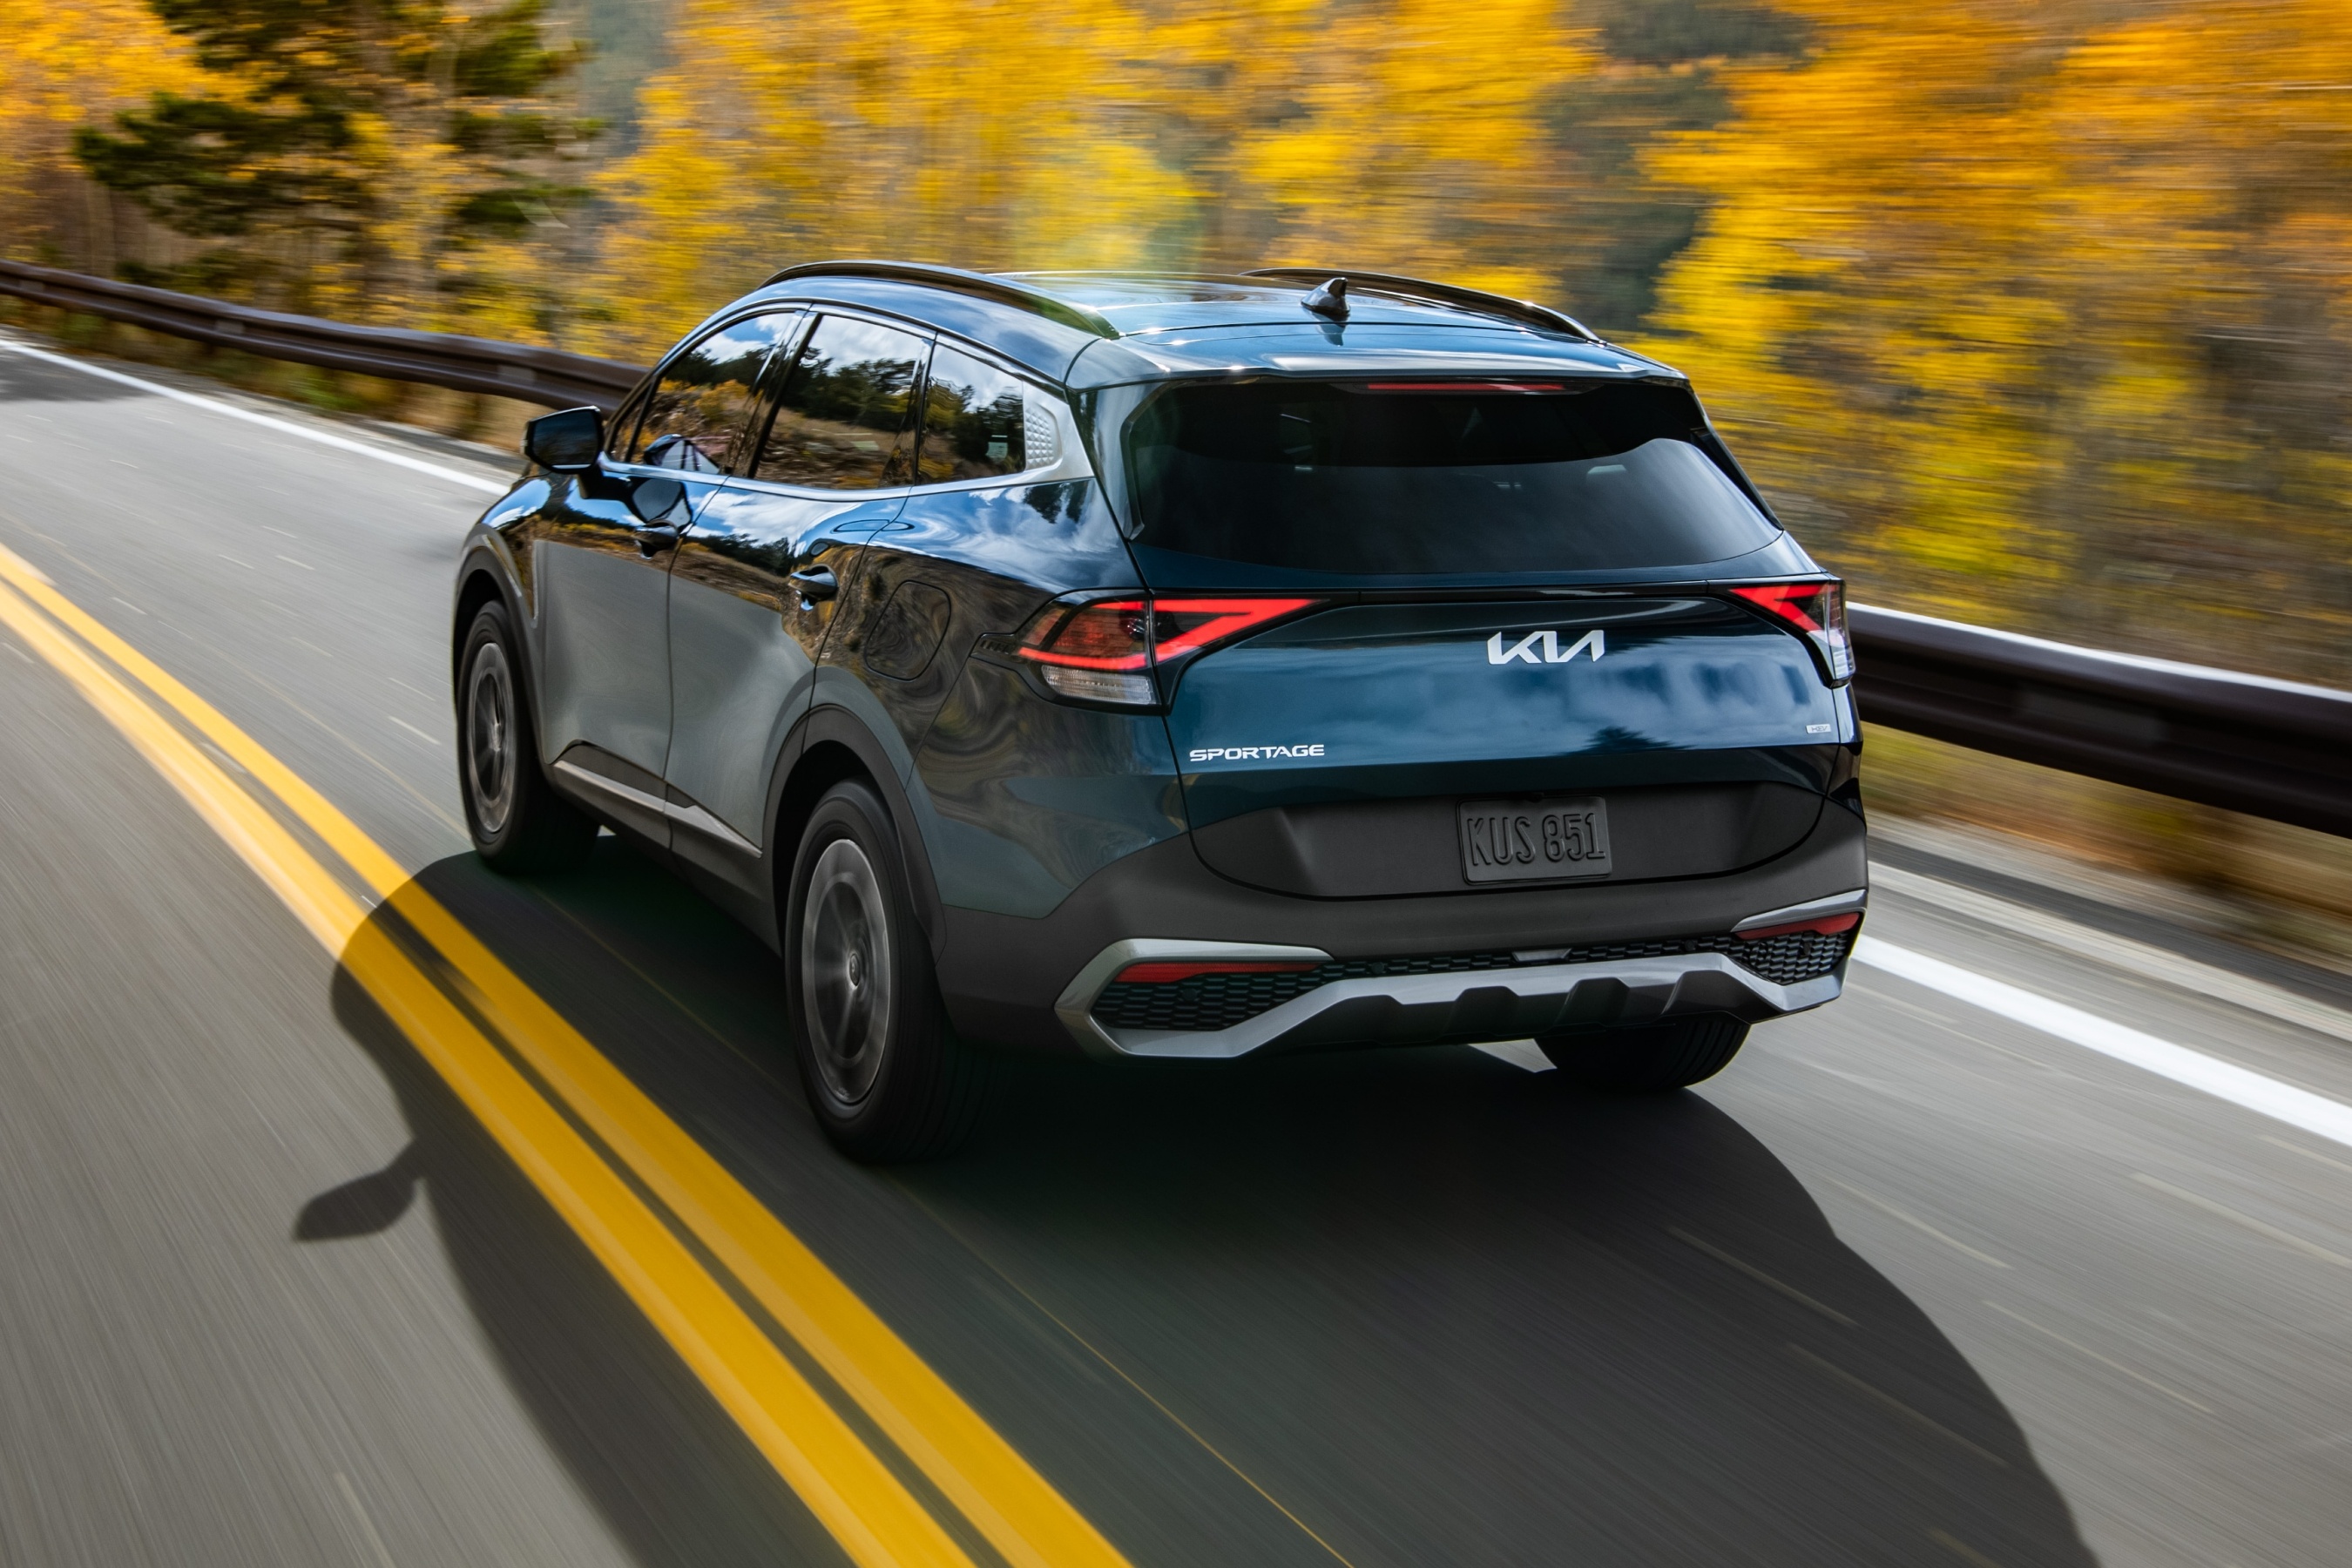 Performance Features of the 2023 Kia Sportage Hybrid Models